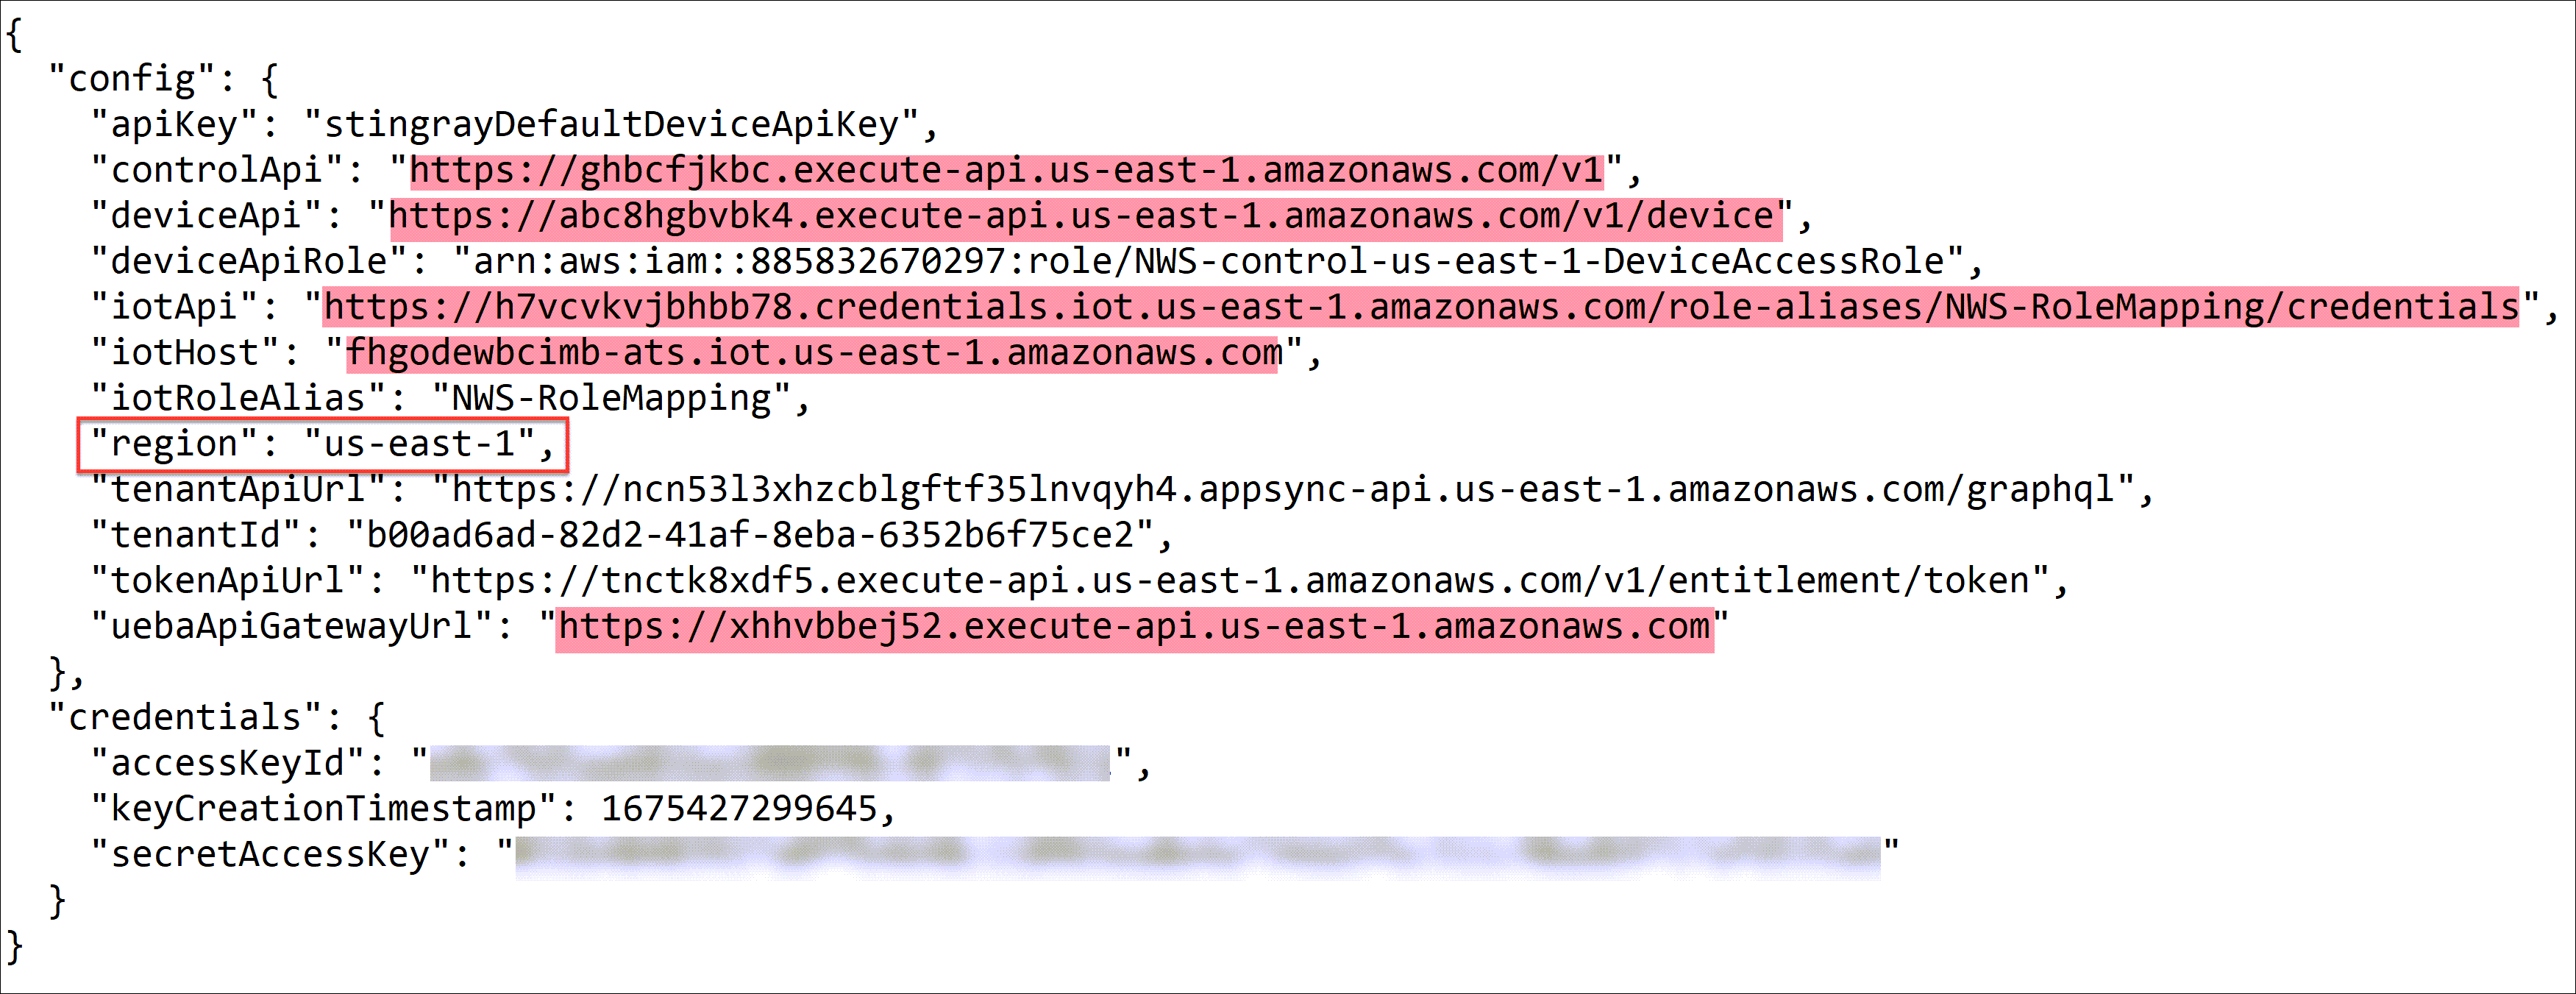 find out the highlighted domains that must be whitelisted for this deployment